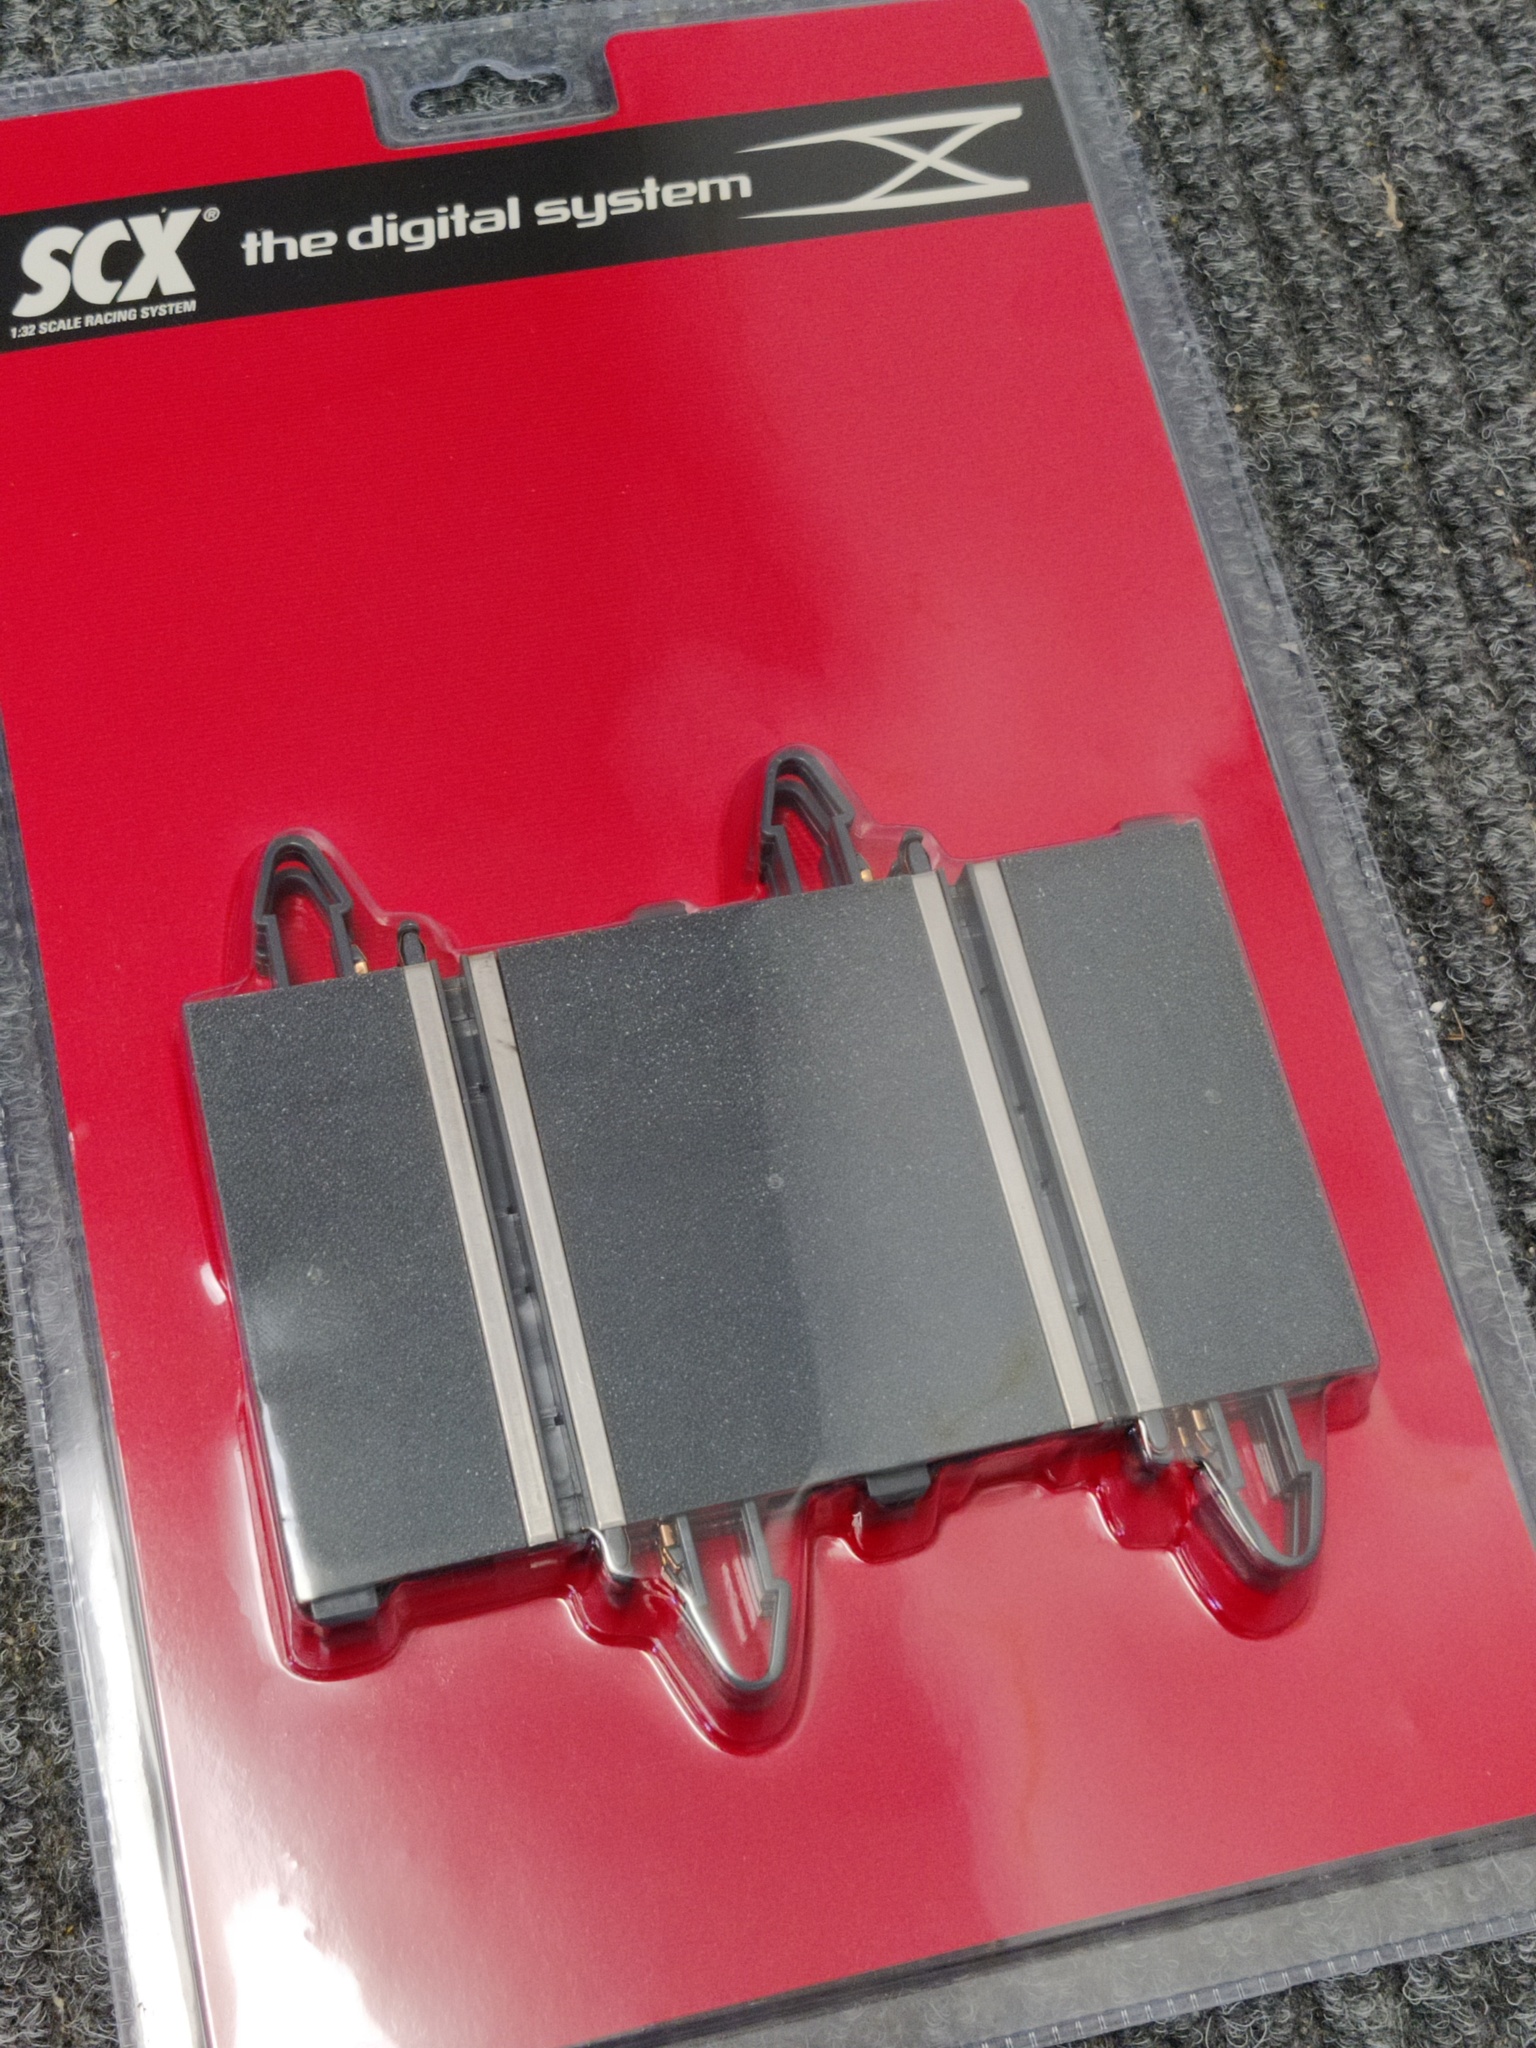 SCX - 90 mm straight track pieces (x2) - SCX universal and Digital track system